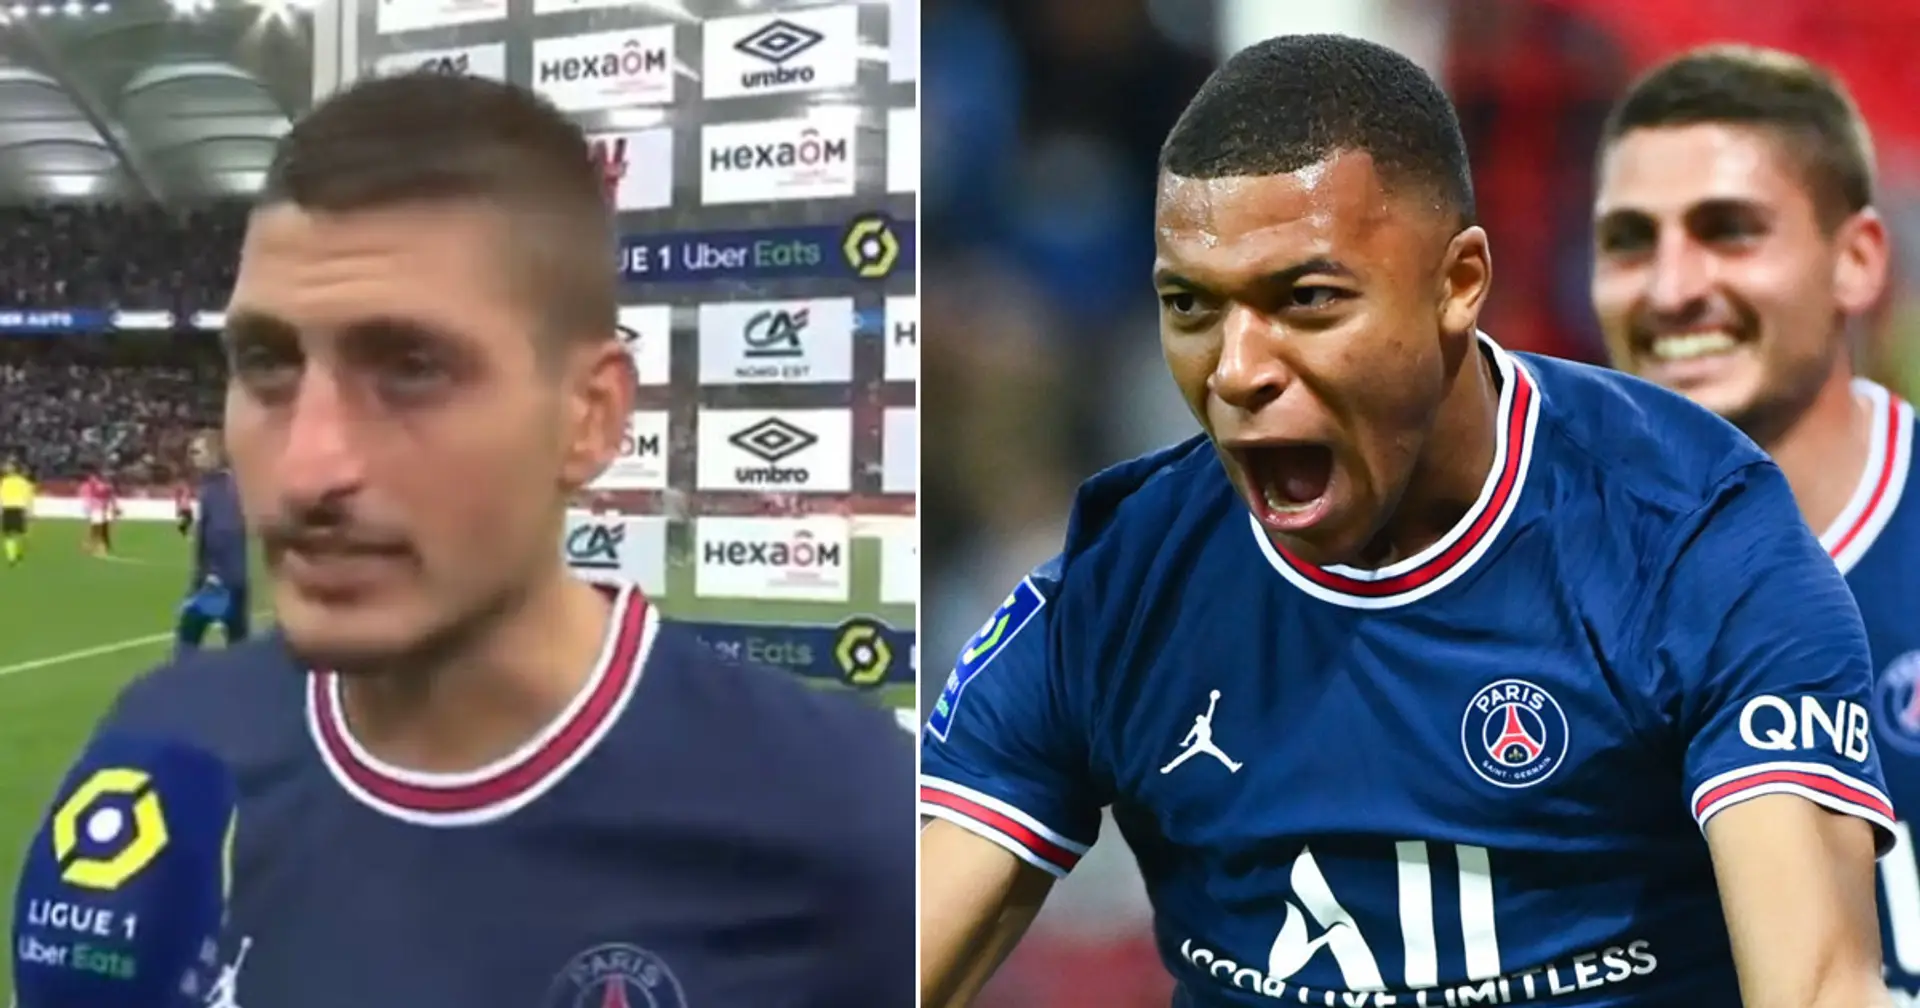 'We want Mbappe to stay': Verratti, Marquinhos make solemn plea to Kylian after Reims masterclass